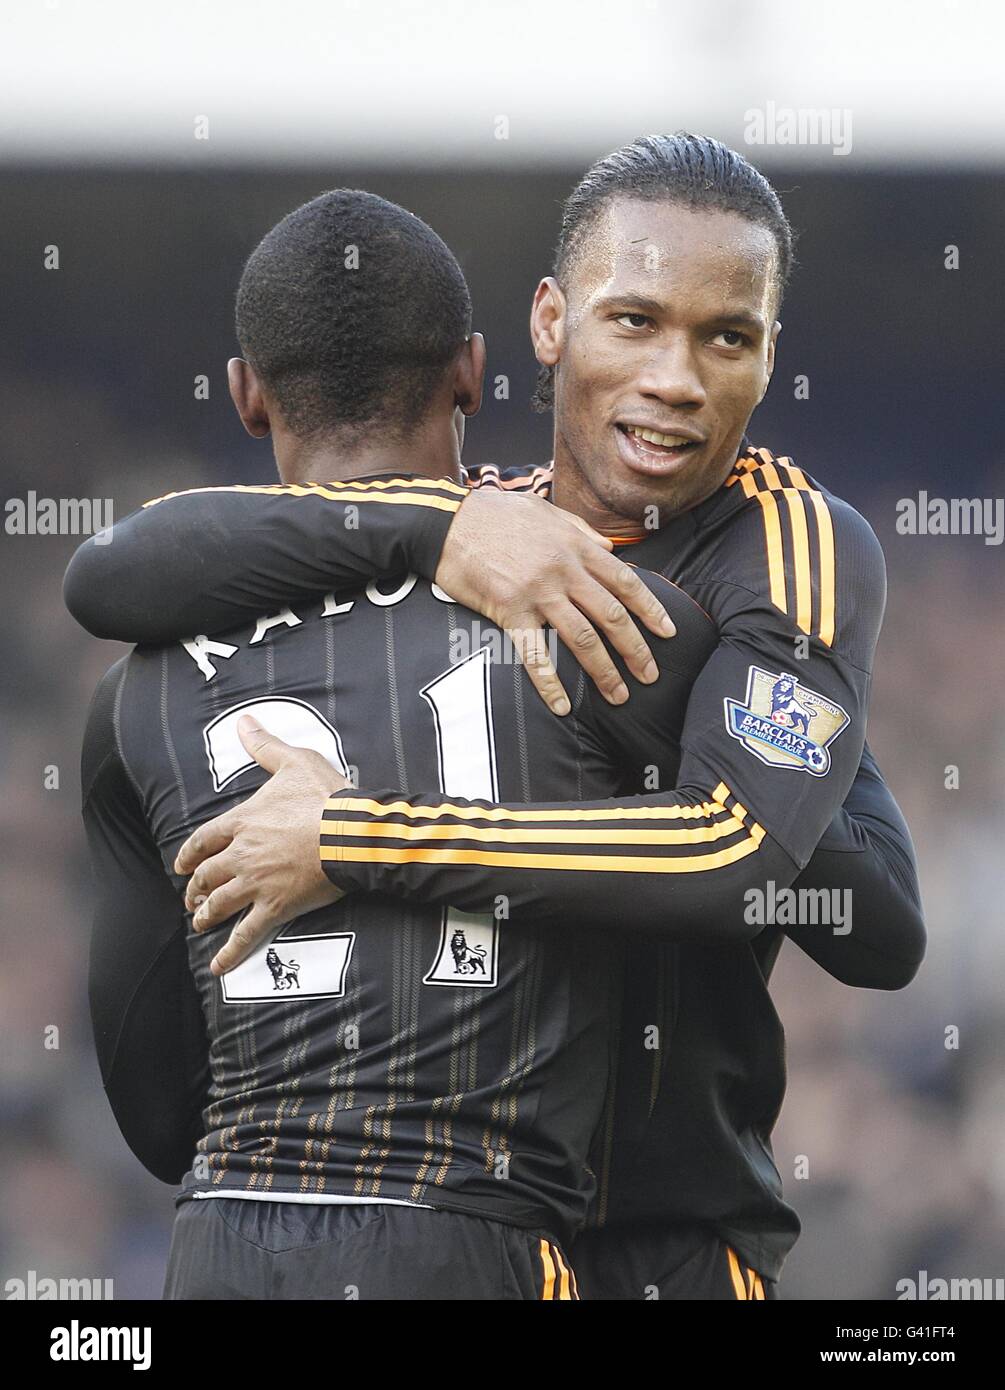 Chelsea's Salomon Kalou (left) and Didier Drogba (right) celebrate after  the final whistle Stock Photo - Alamy